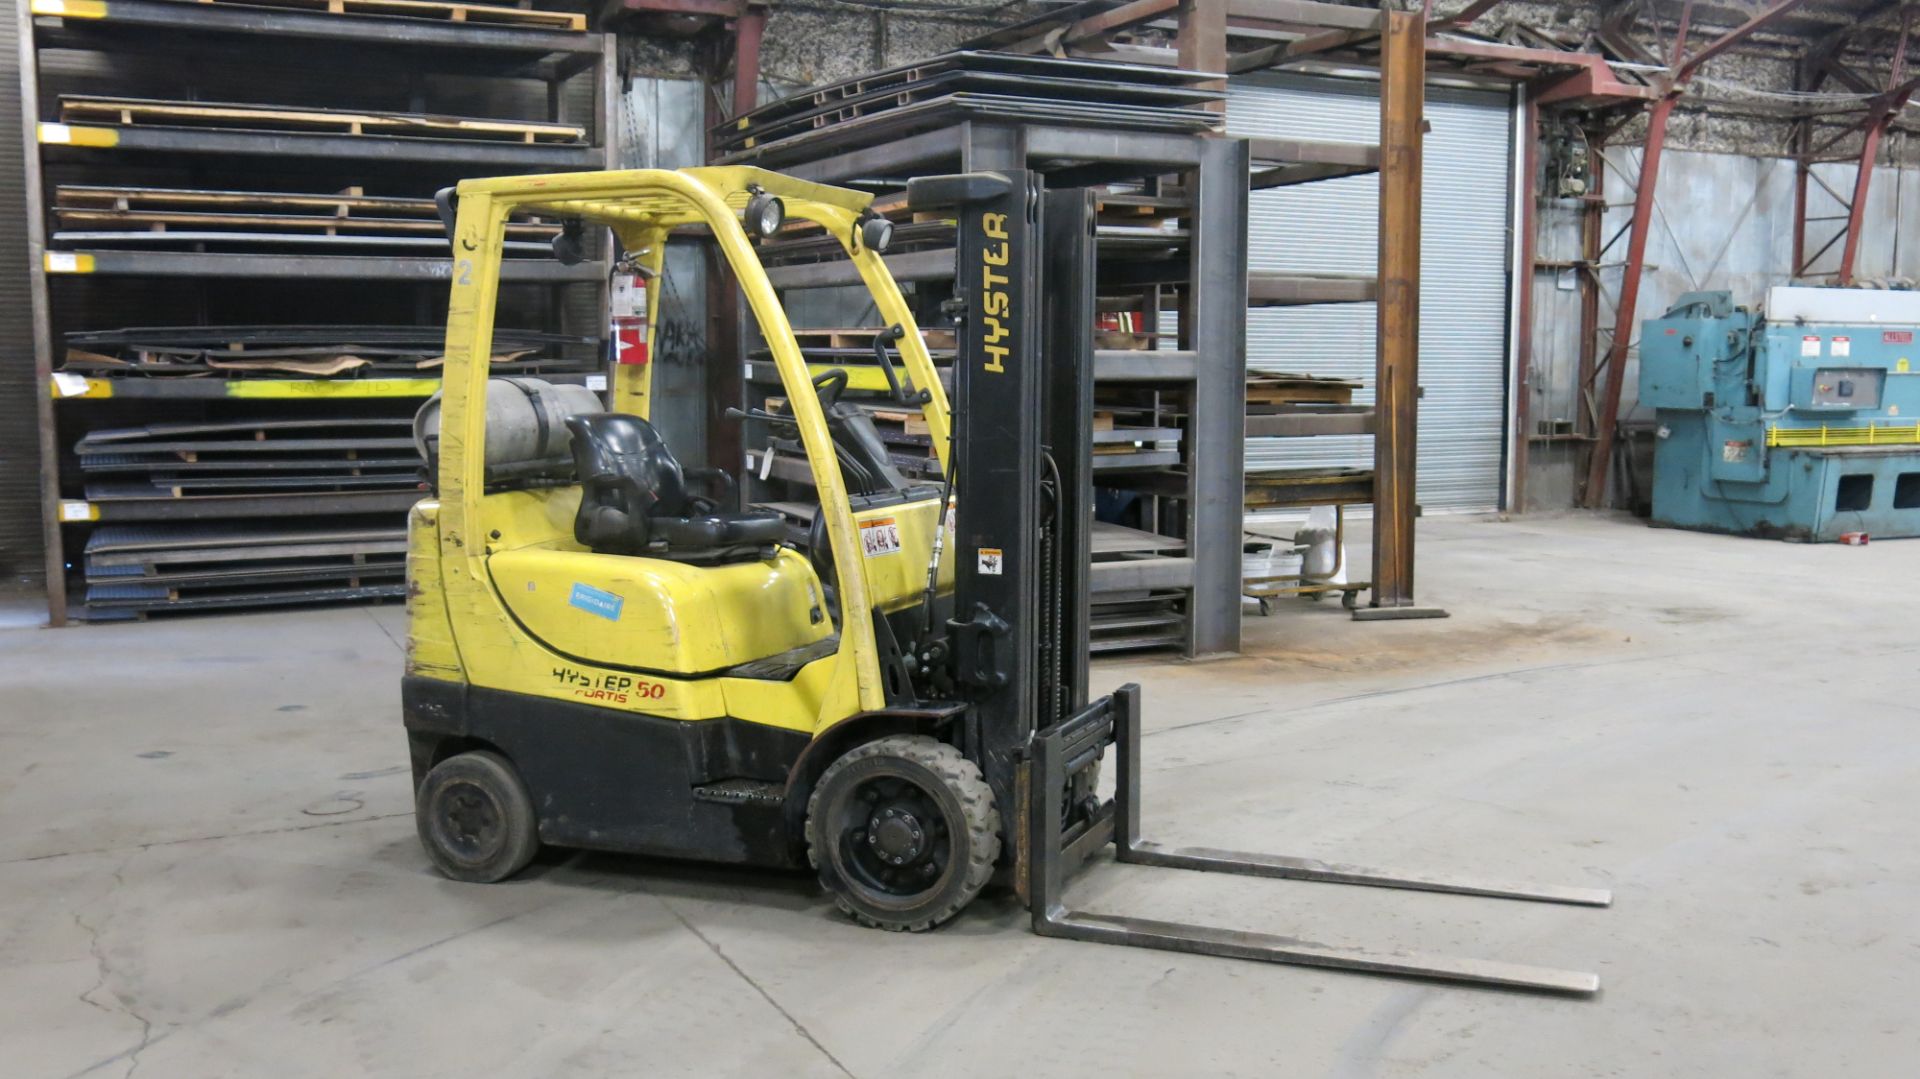 HYSTER, S50FT, 4,550 LBS., 3 STAGE, LPG FORKLIFT WITH SIDESHIFT, 189" MAXIMUM LIFT - Image 2 of 10